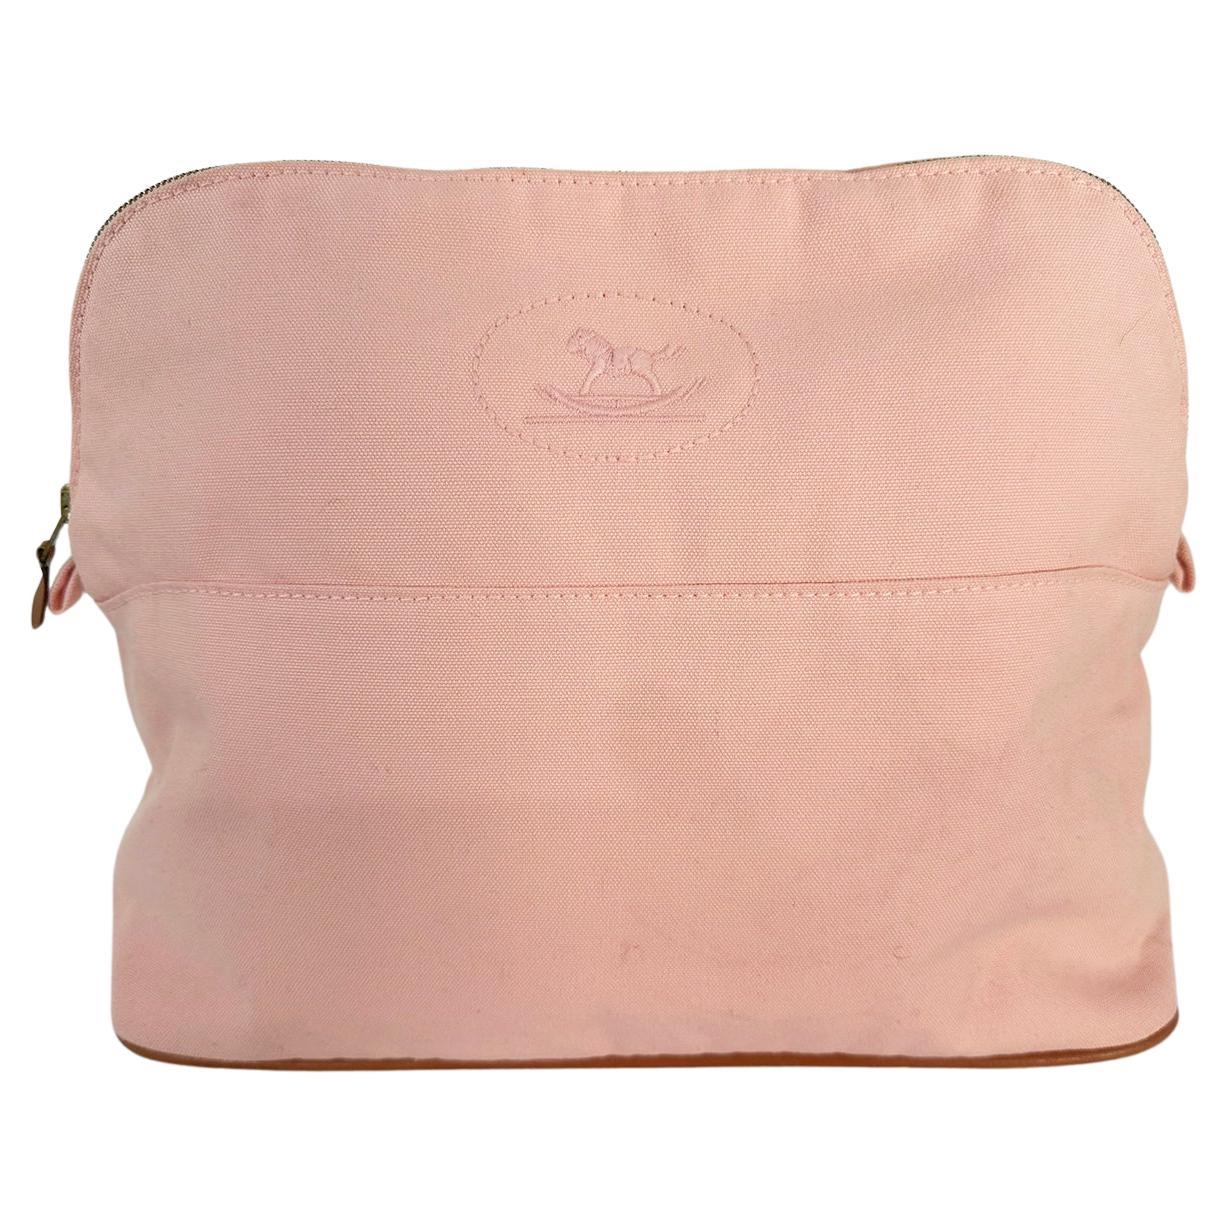 Hermes Bolide soft pink canvas cosmetic bag with rocking horse embroidery at the outside front. 2021. Lamb leather welt cord trim at bottom edge & gold zipper pull tab. Lined in pink with a single interior slip pocket. Large size 11